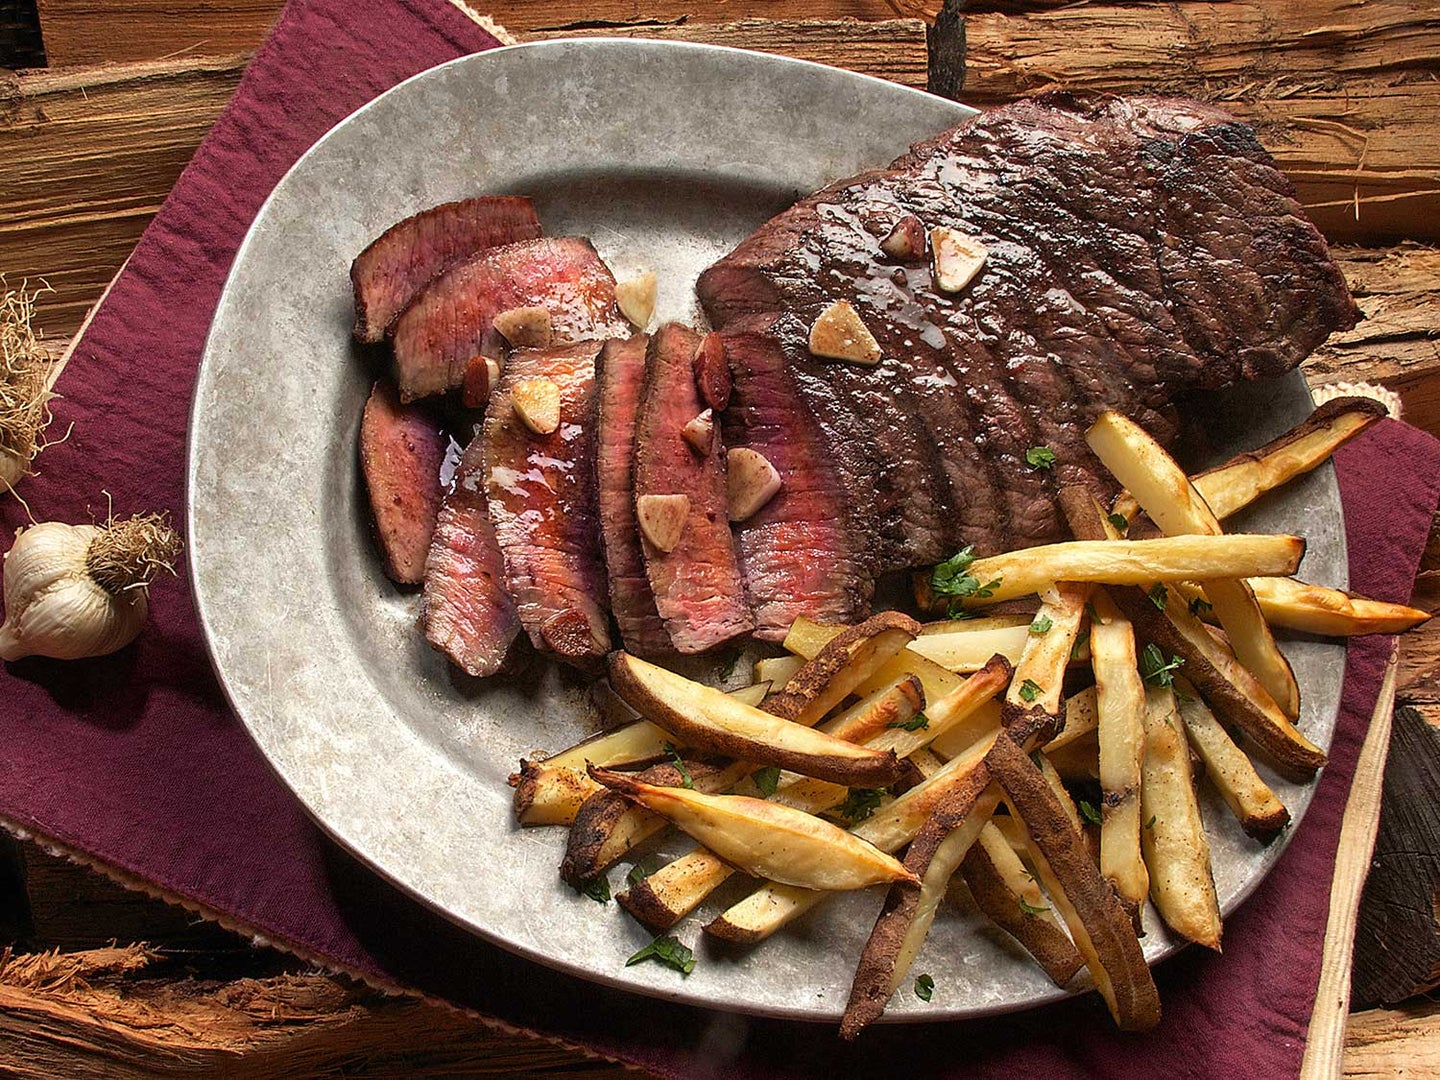 Steak and french fries on plate.